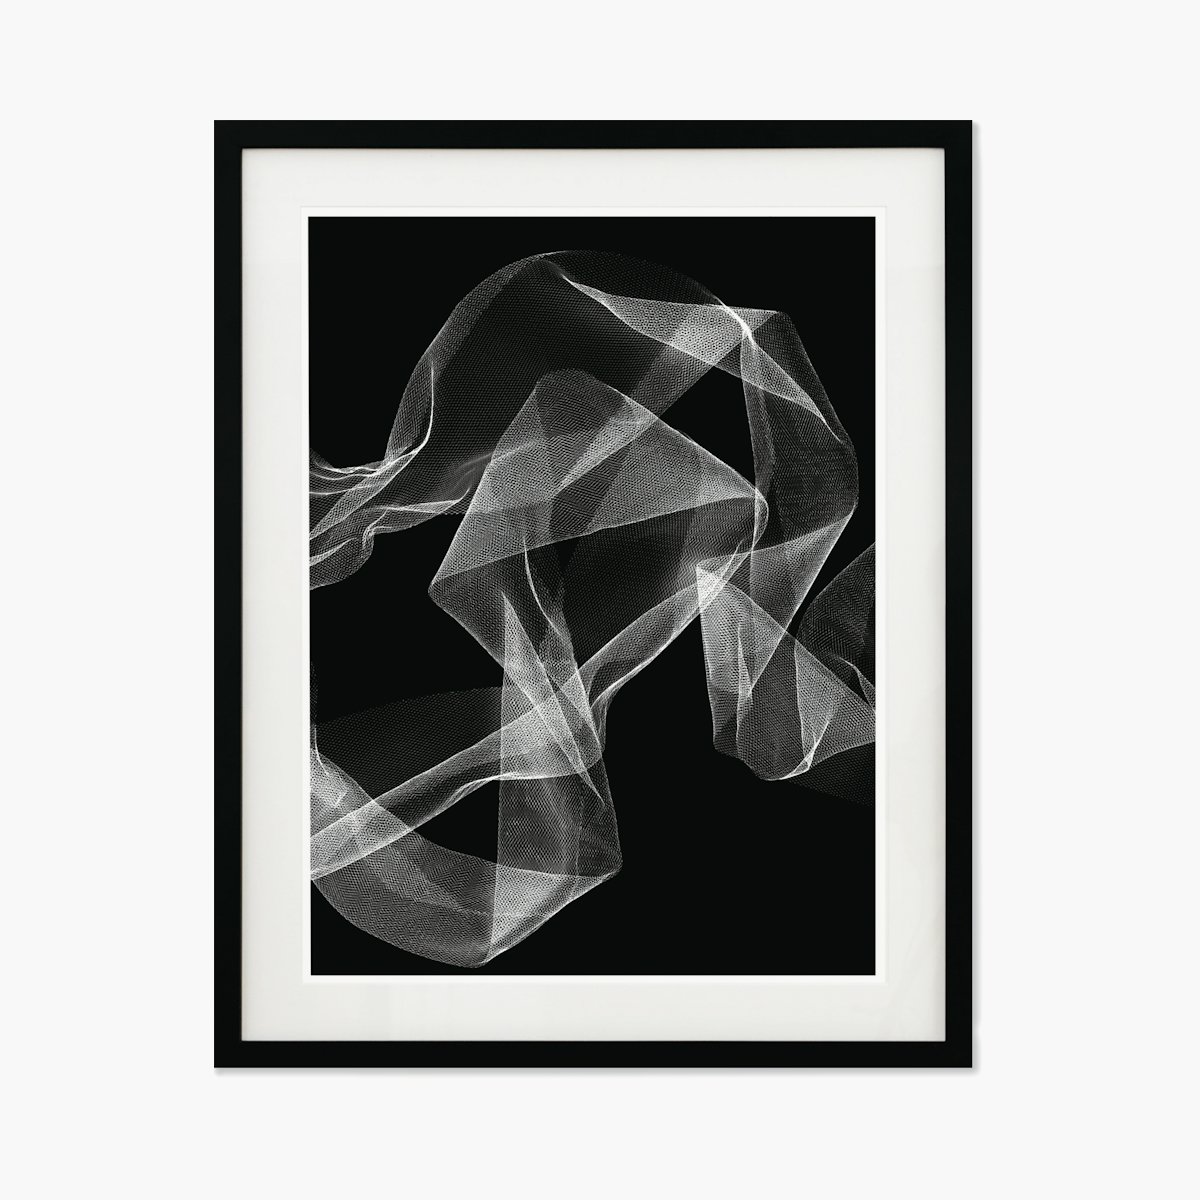 “Illusion” by Permanent Press Editions, Edition 3